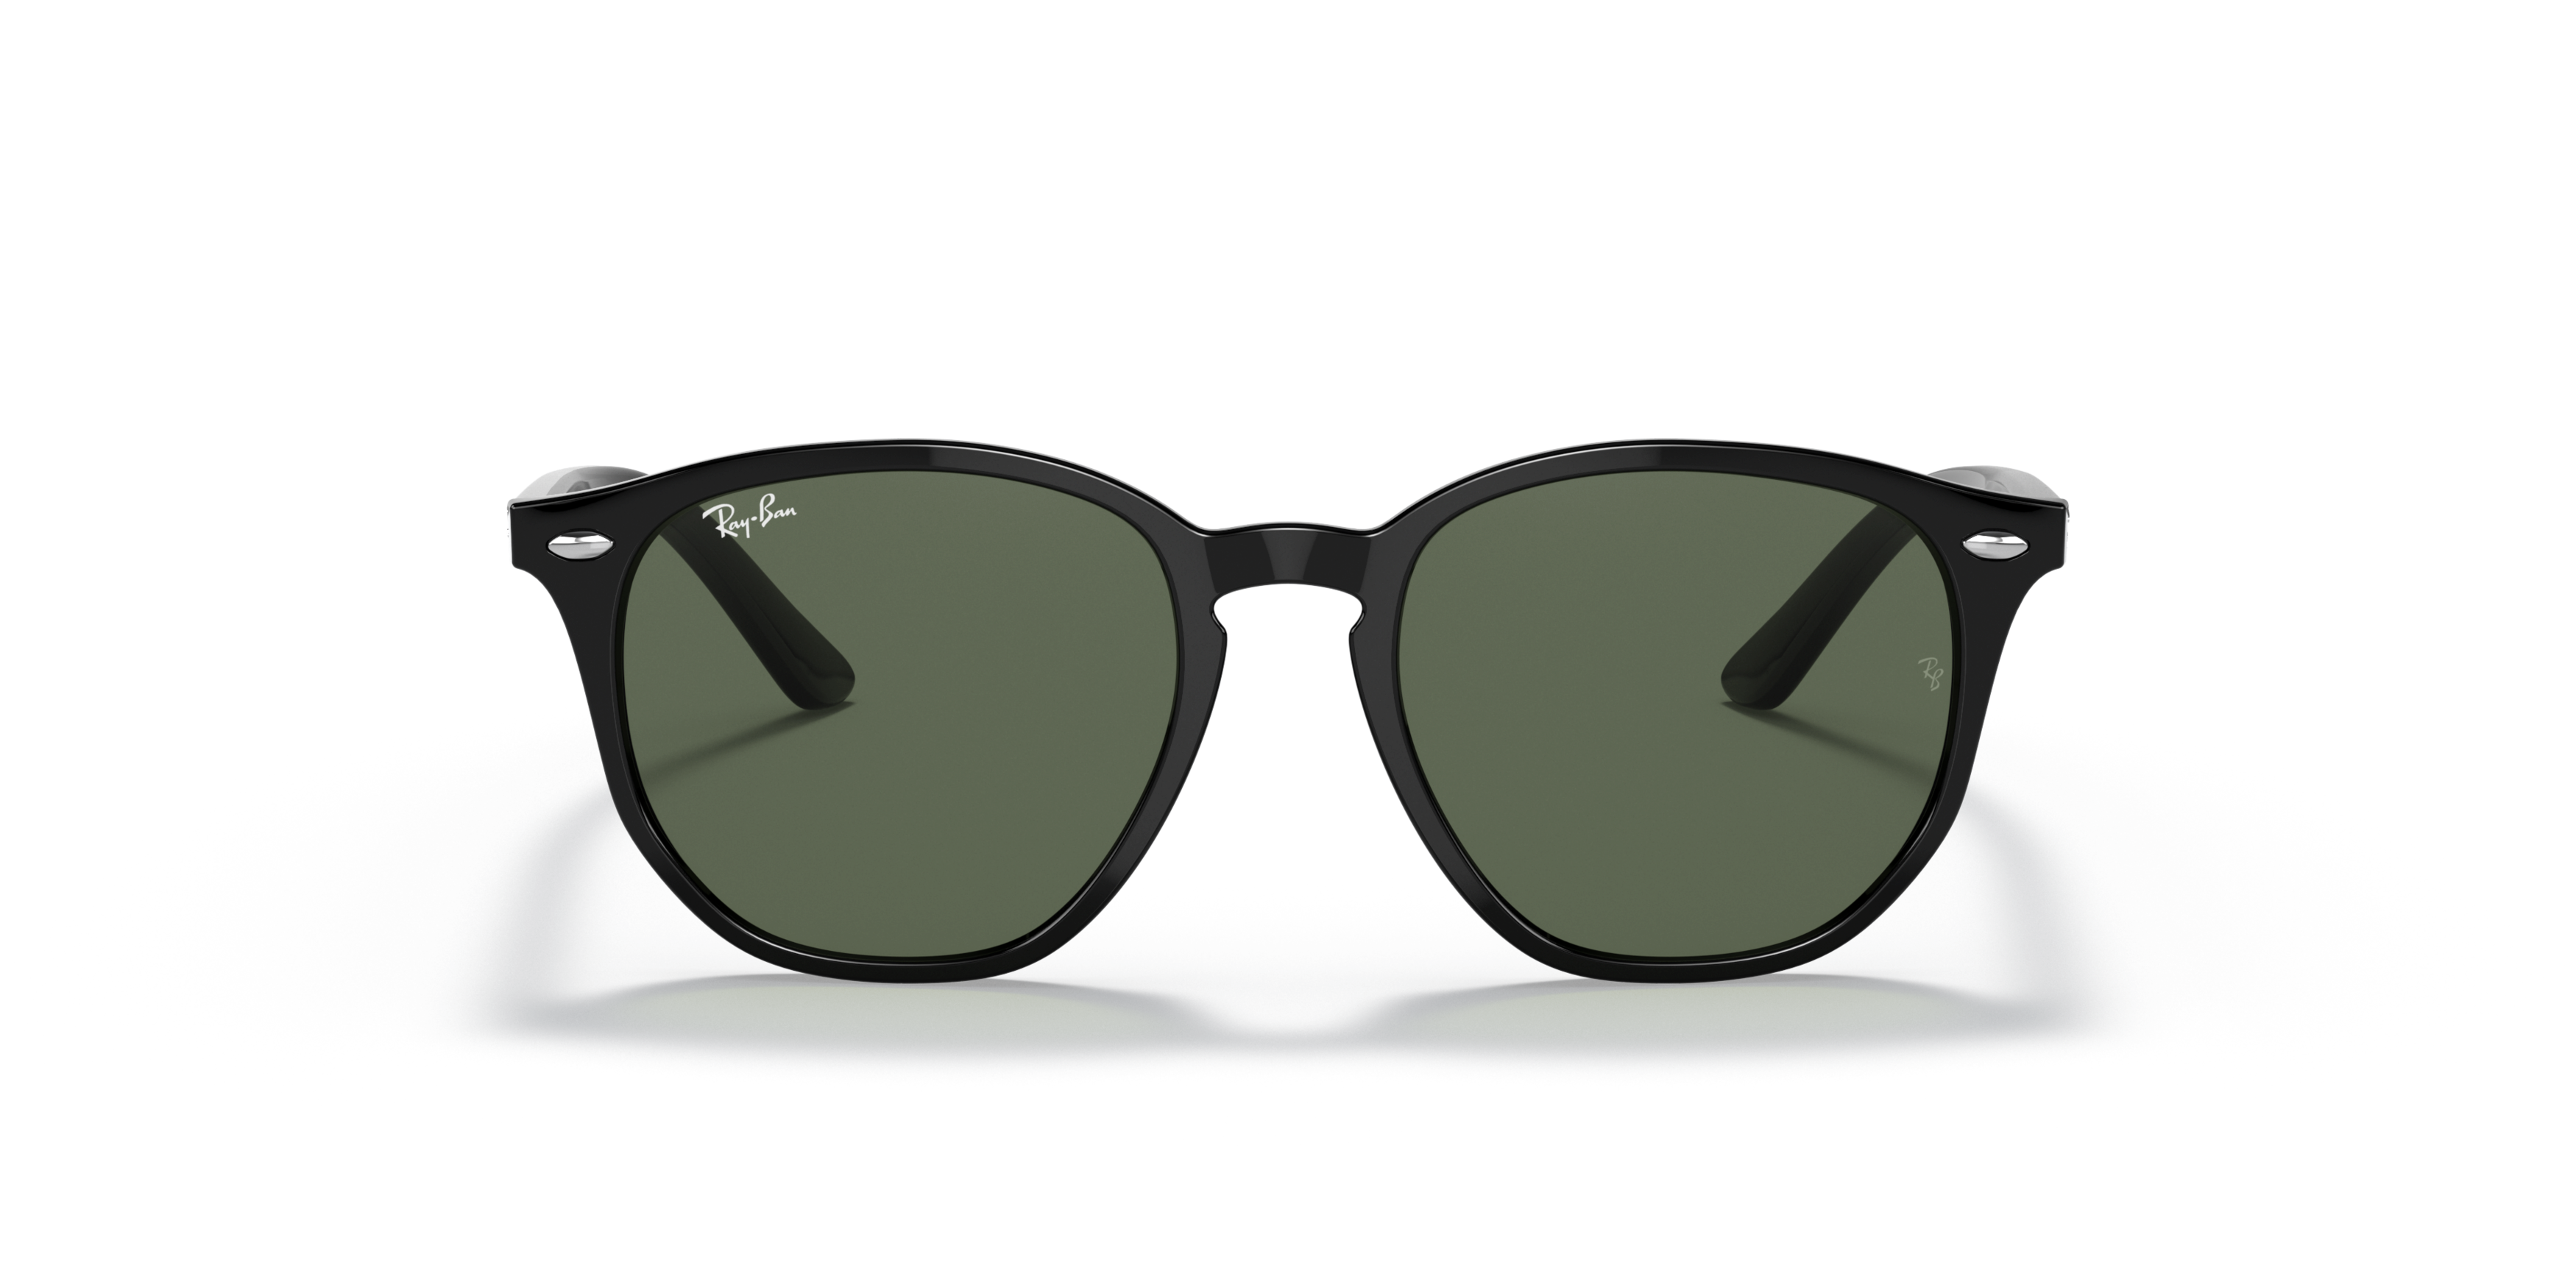 [products.image.front] Ray-Ban RJ9070S 100/71